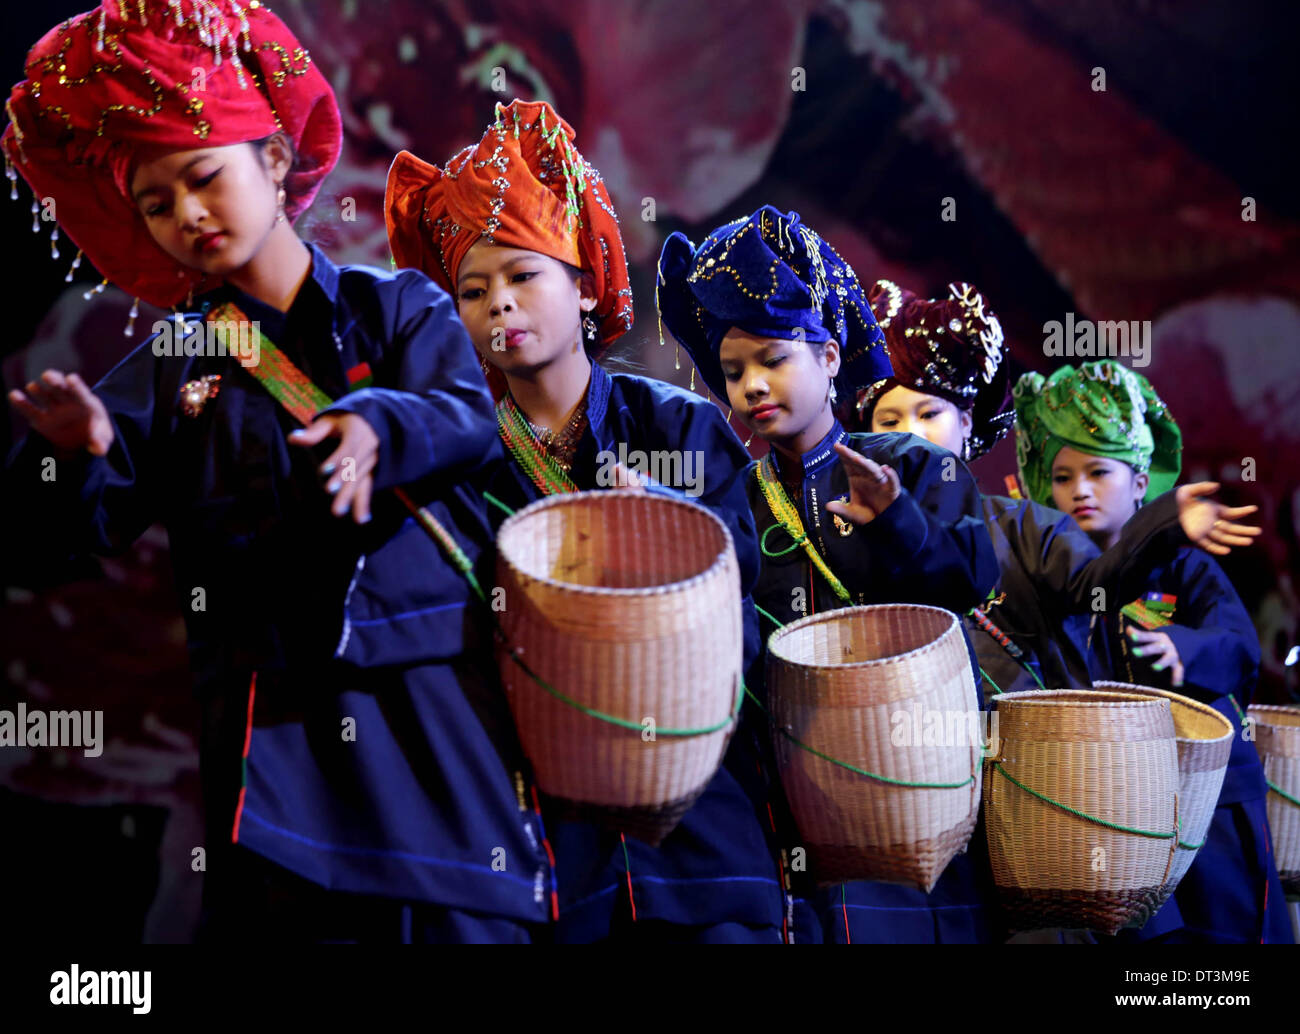 Yangon, Myanmar. 7th February 2014. Pa-Oh ethnic girls perform during the ceremony celebrating the 67th anniversary of Shan State Day in Yangon, Myanmar, Feb. 7, 2014. (Xinhua/U Aung/Alamy Live News) Stock Photo